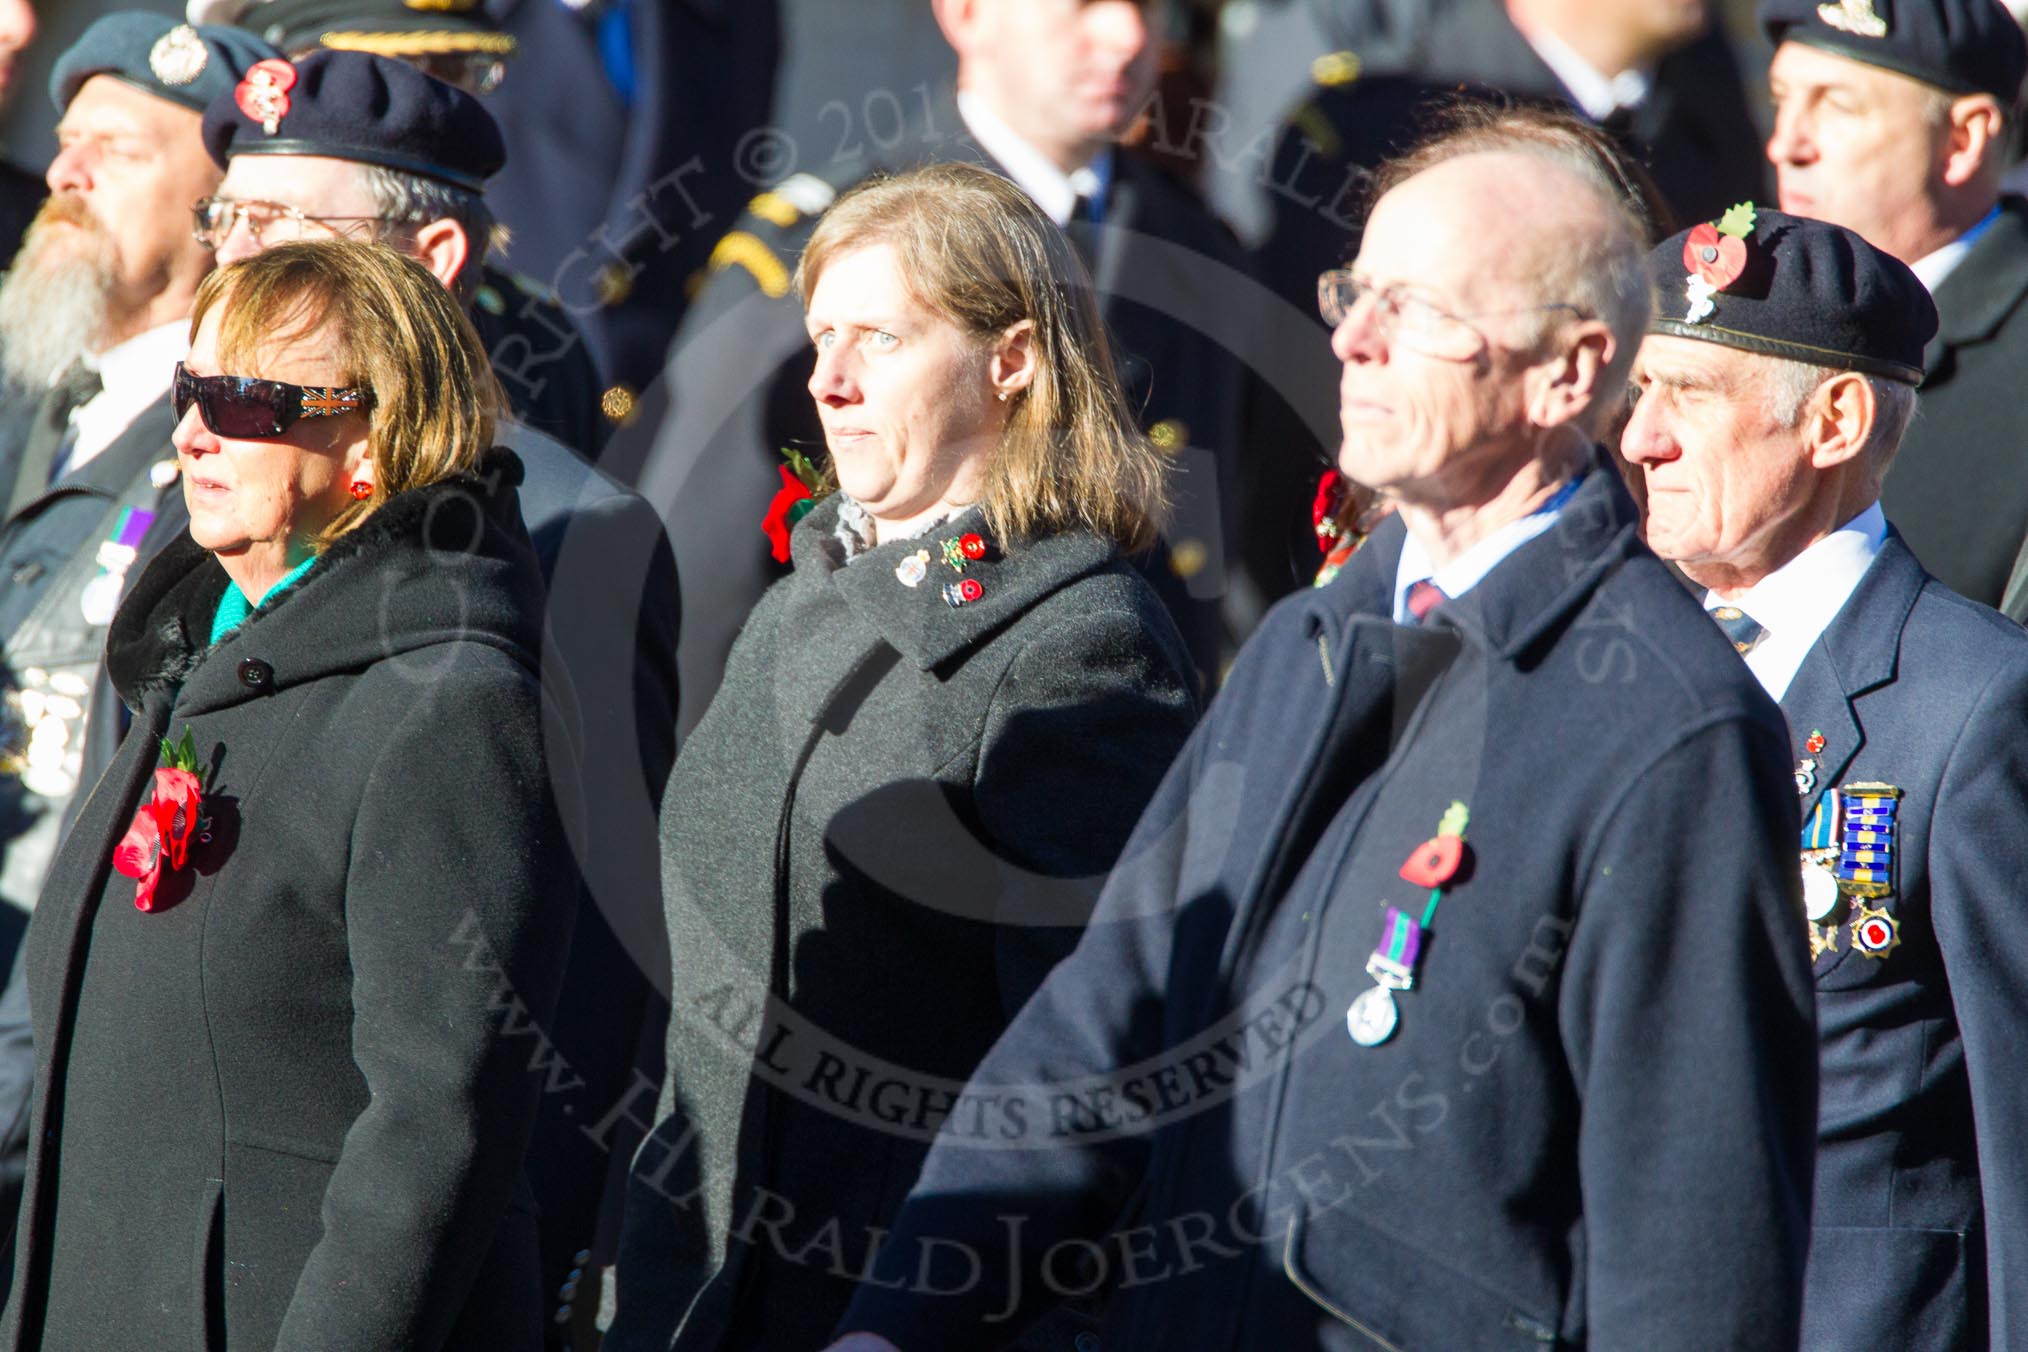 Remembrance Sunday Cenotaph March Past 2013: D13 - The Royal British Legion. There are more photos of this large group, please email Cenotaph@HaraldJoergens.com if interested..
Press stand opposite the Foreign Office building, Whitehall, London SW1,
London,
Greater London,
United Kingdom,
on 10 November 2013 at 11:40, image #120